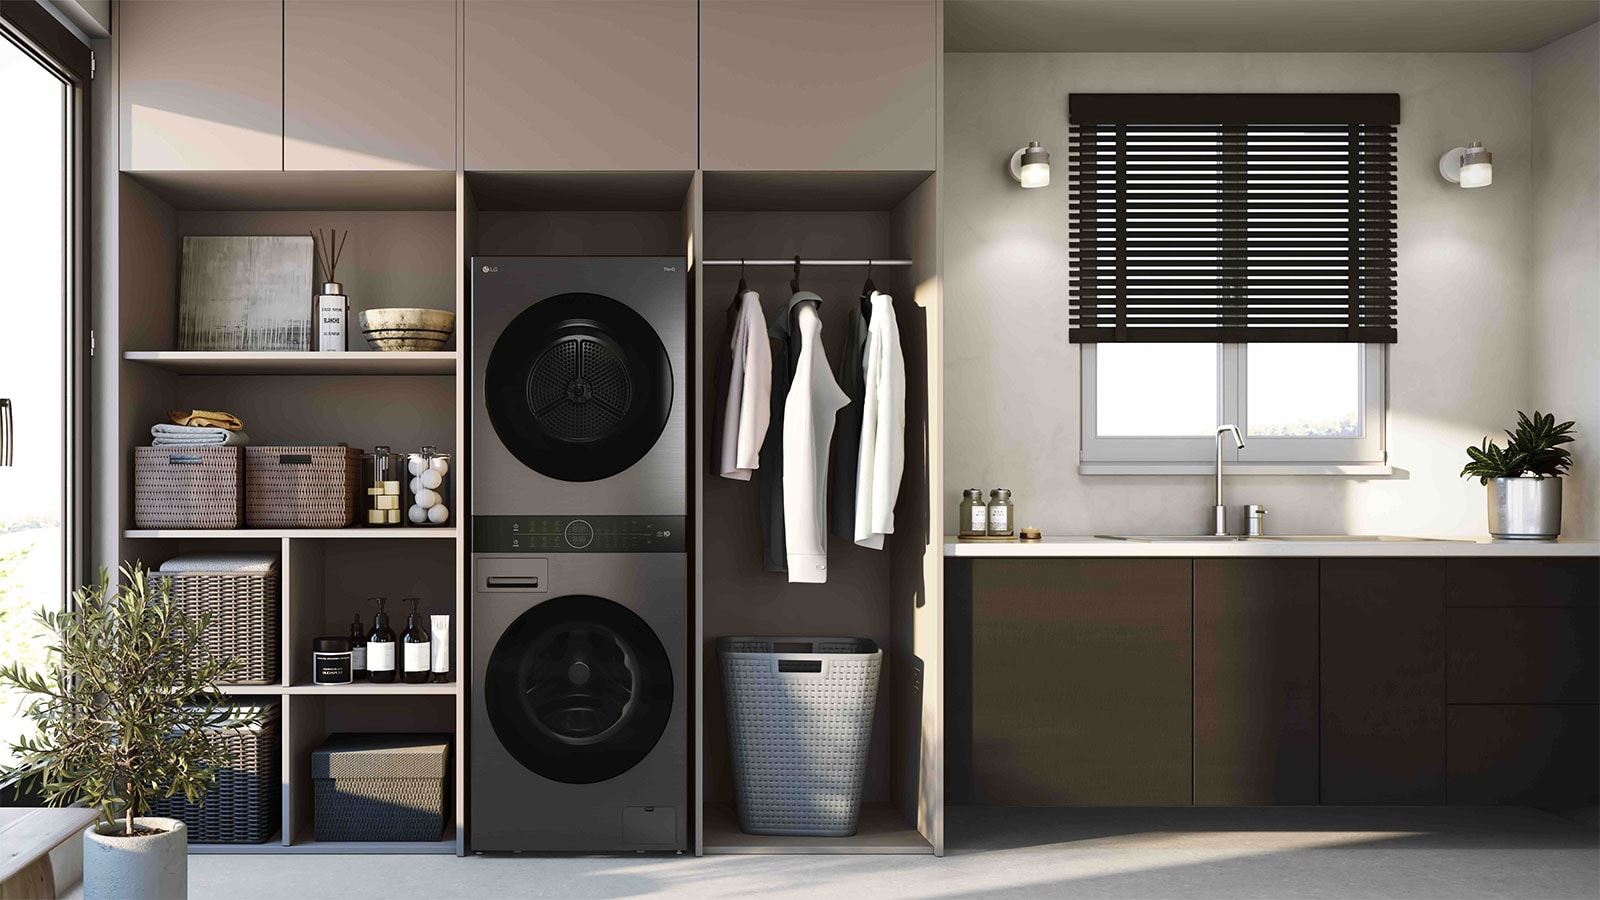 Intelligent Washer and Dryer Solution